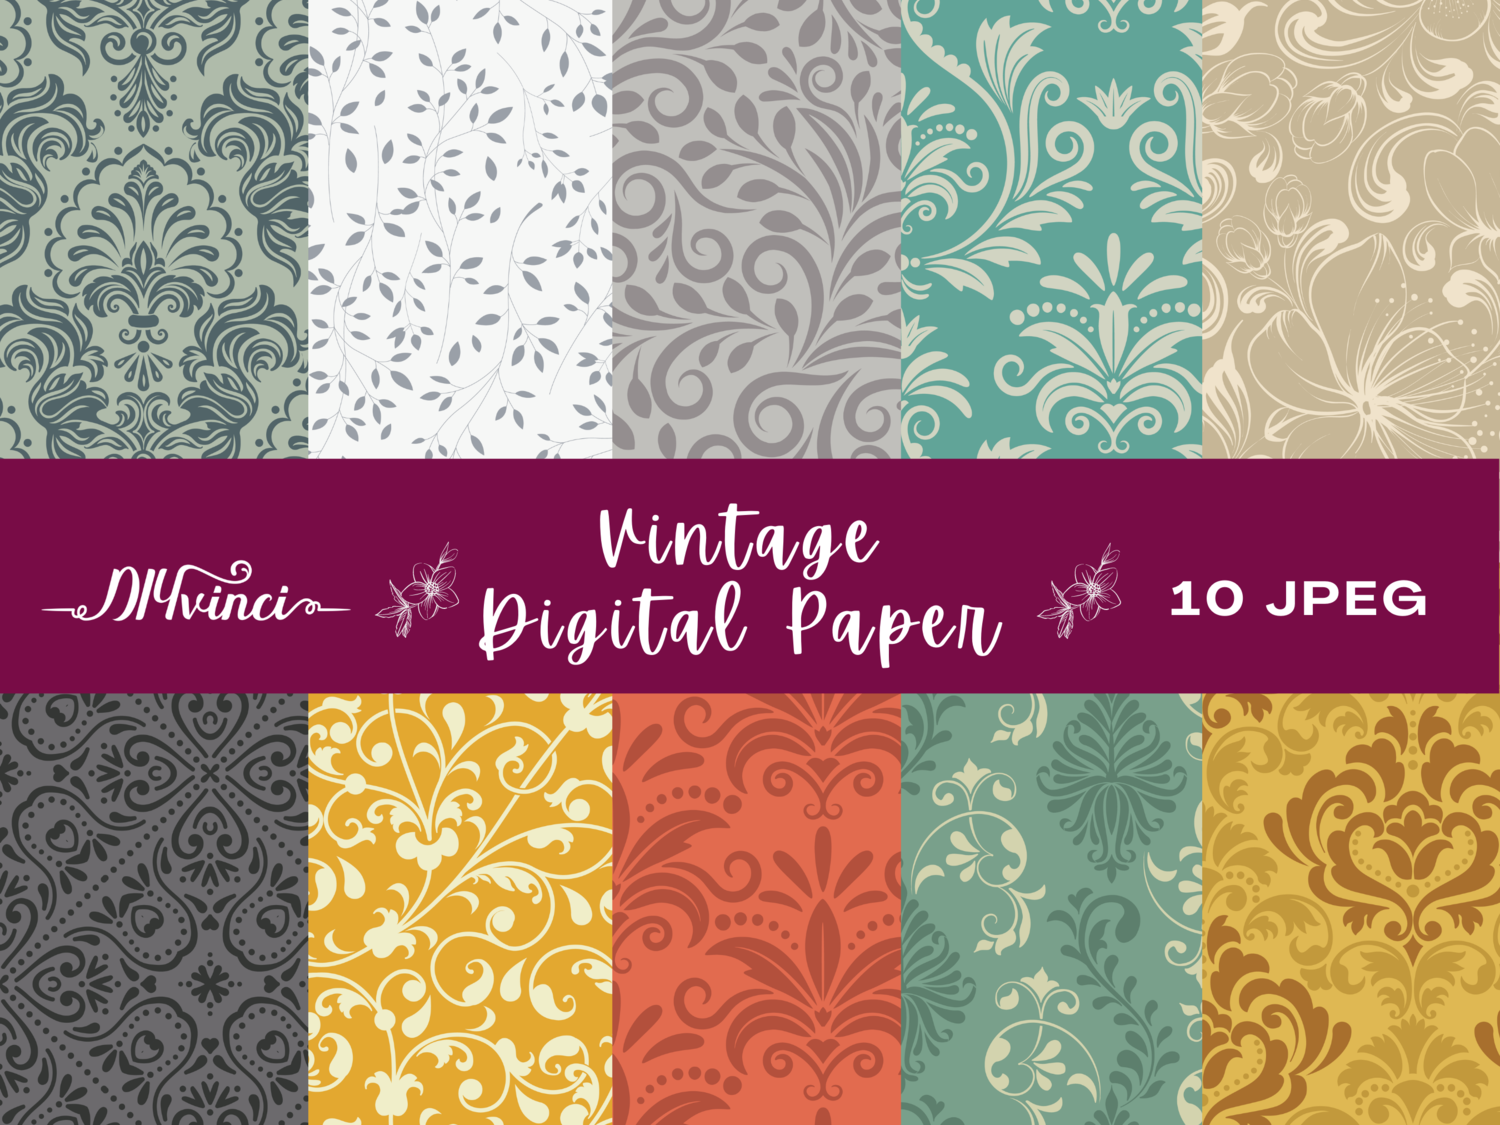 10 Seamless Vintage Digital Paper Patterns - JPEG - Personal & Commercial Use